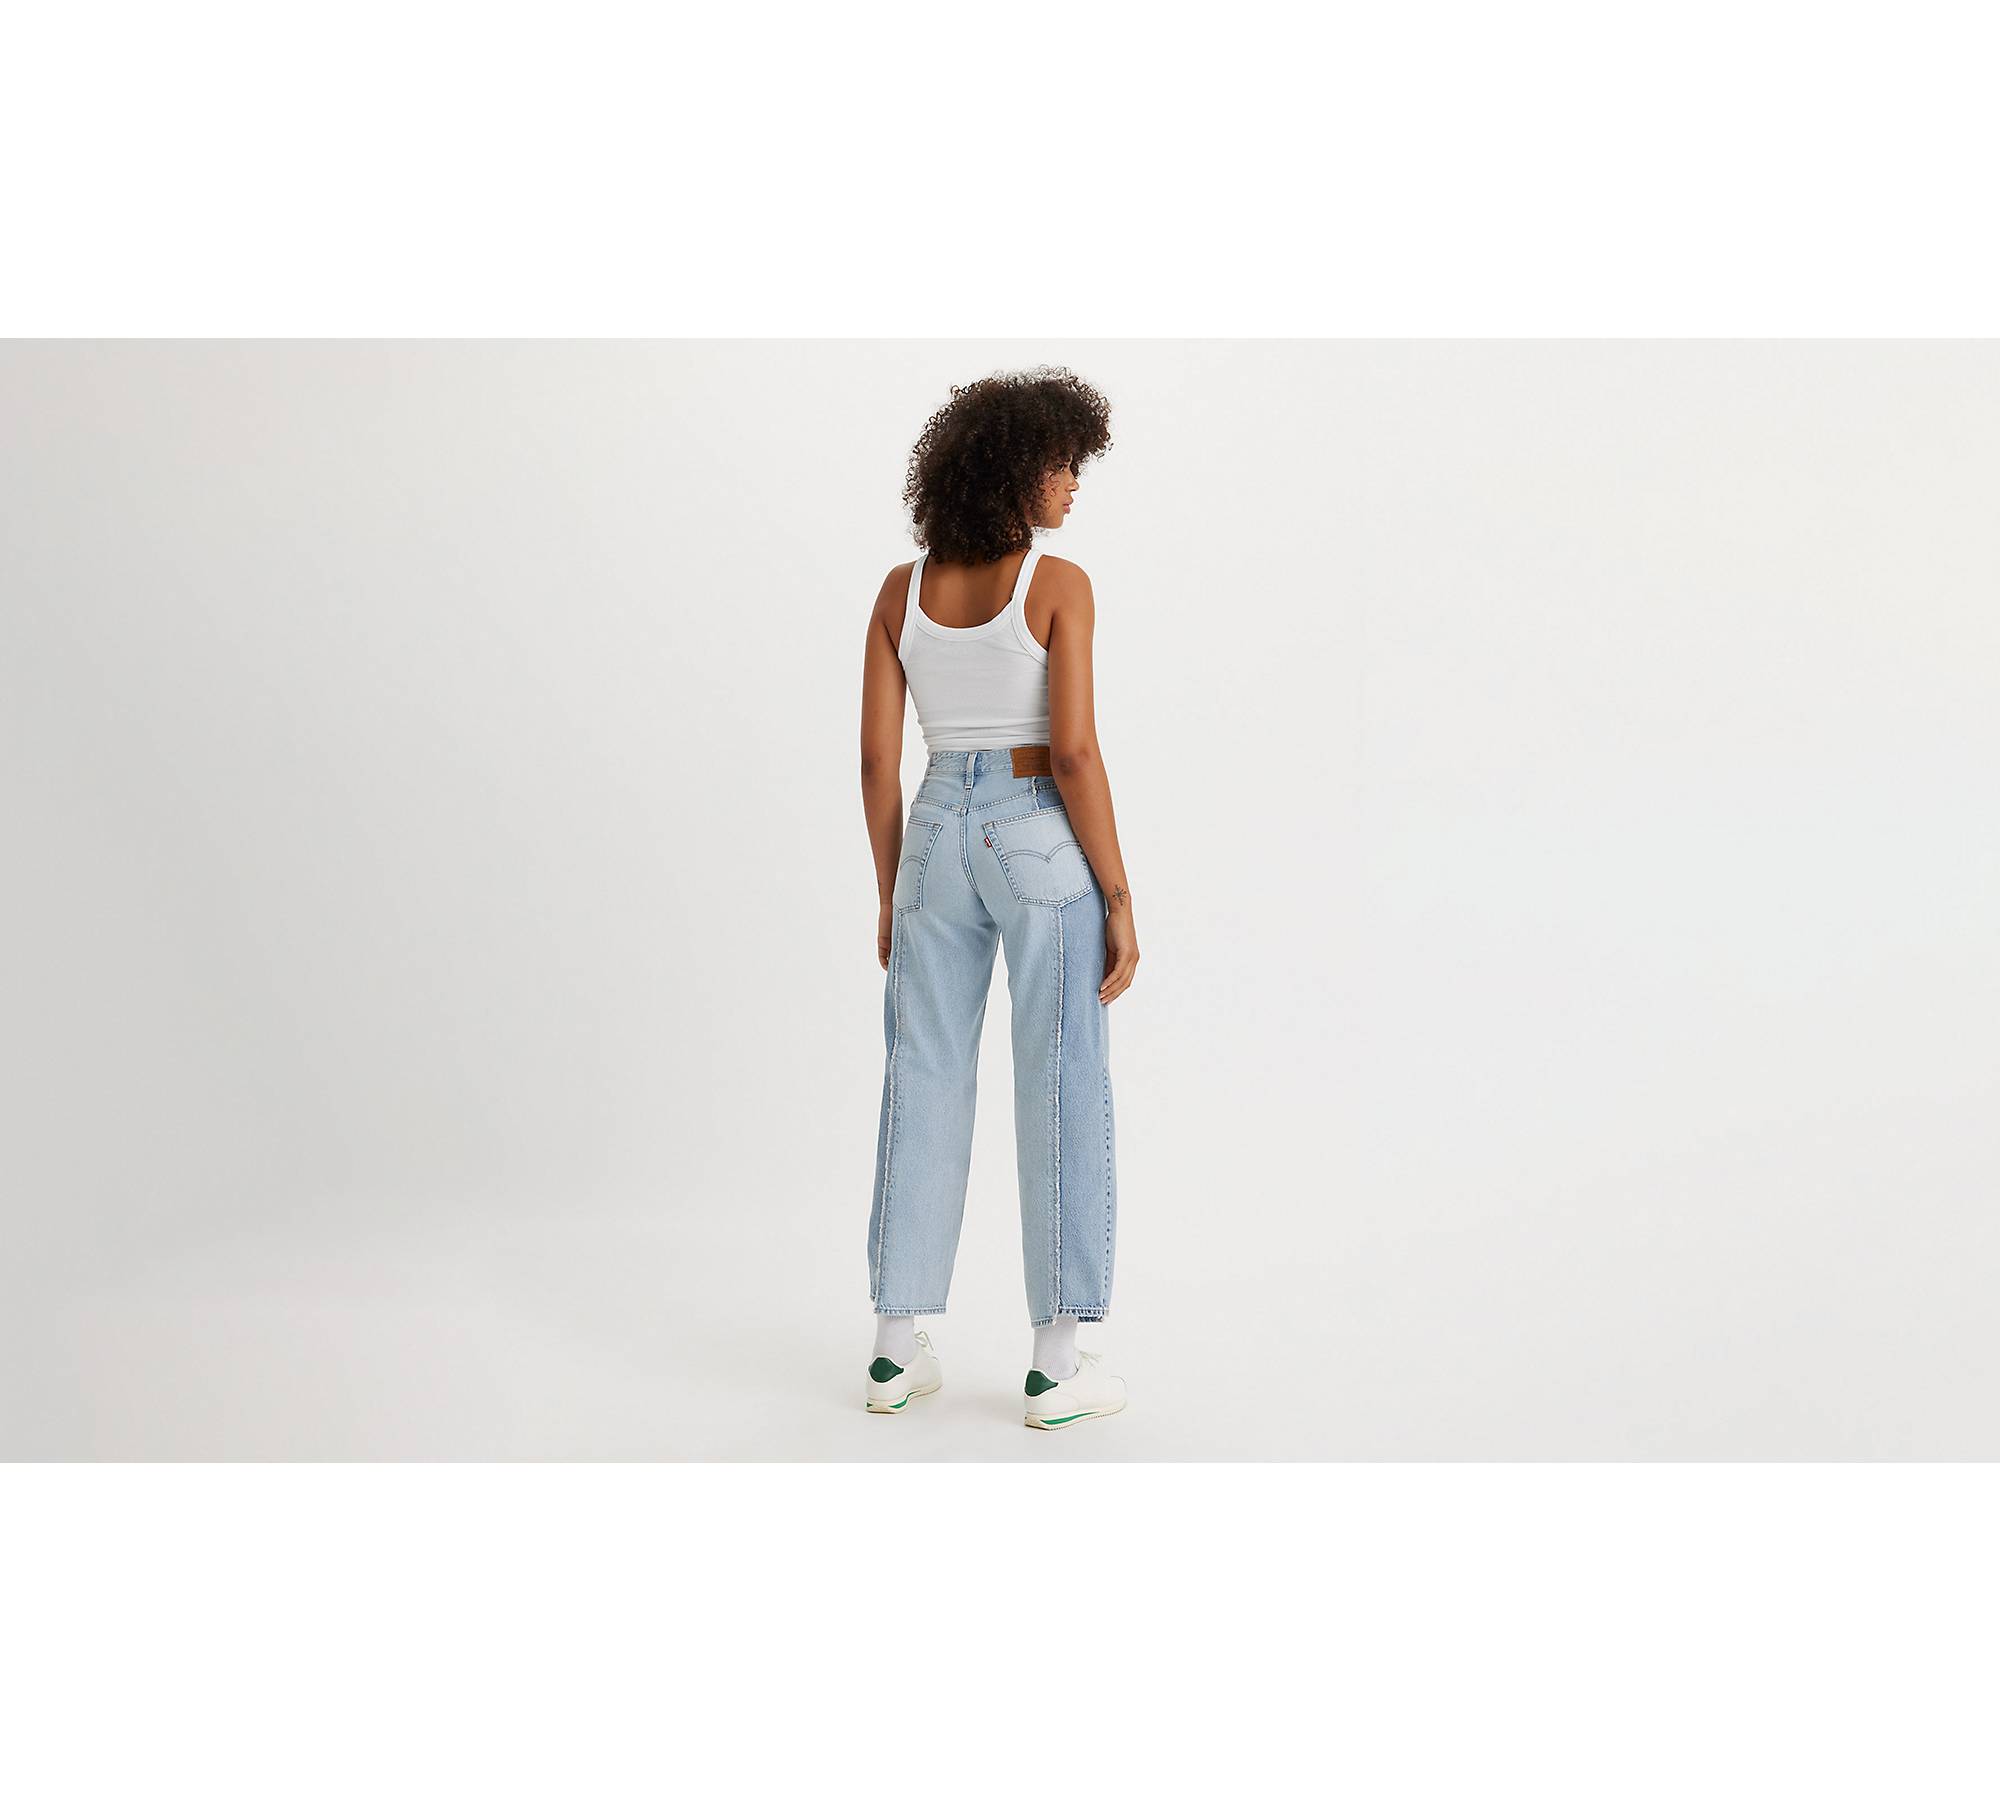 Baggy Dad Recrafted Women's Jeans - Medium Wash